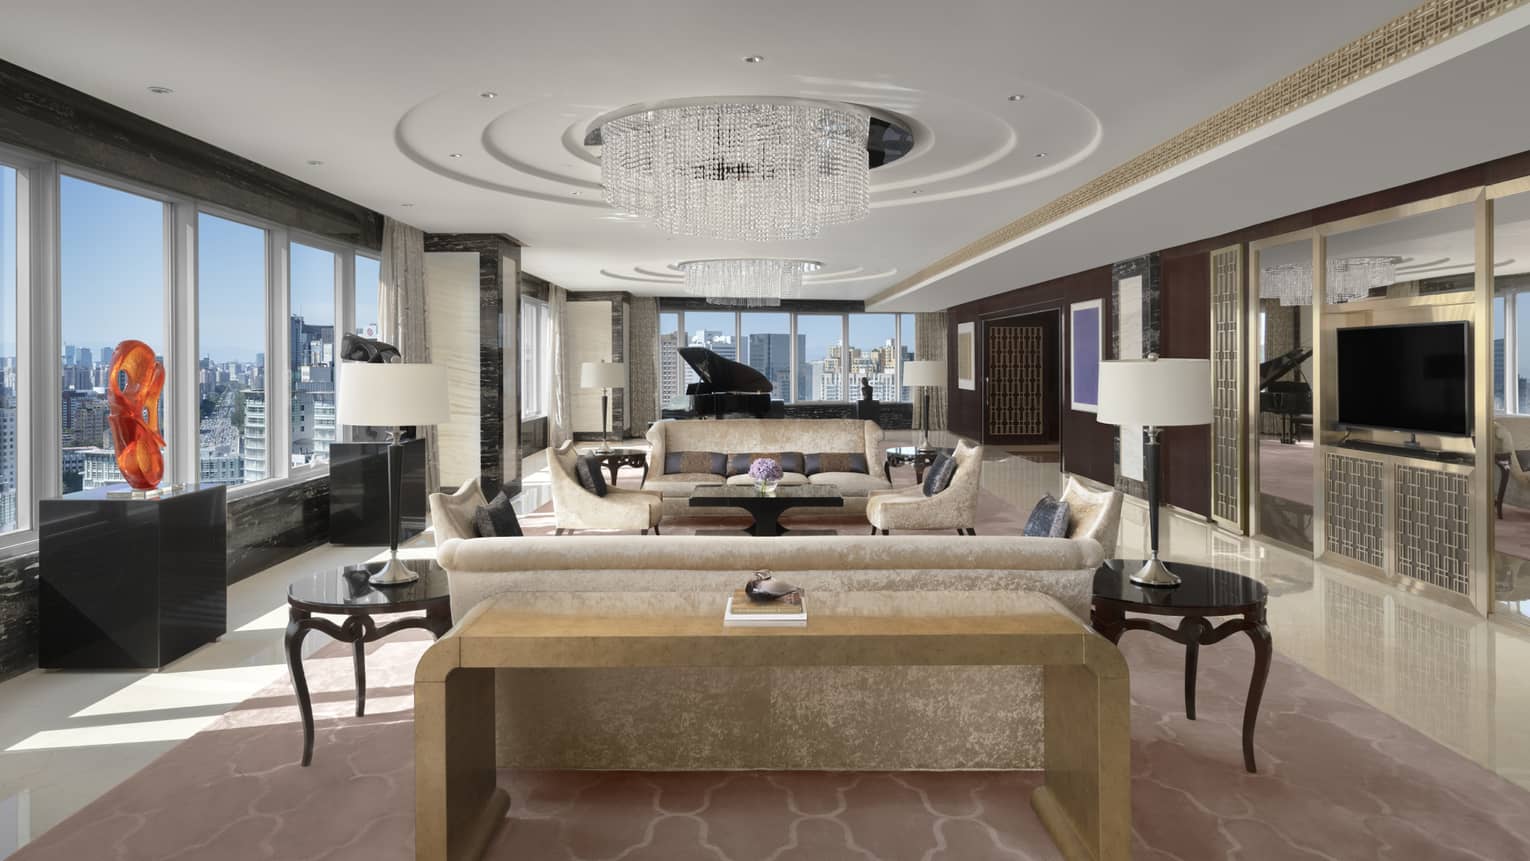 Lavish living room with circular chandelier, two sofas, red sculpture on display, walls of windows